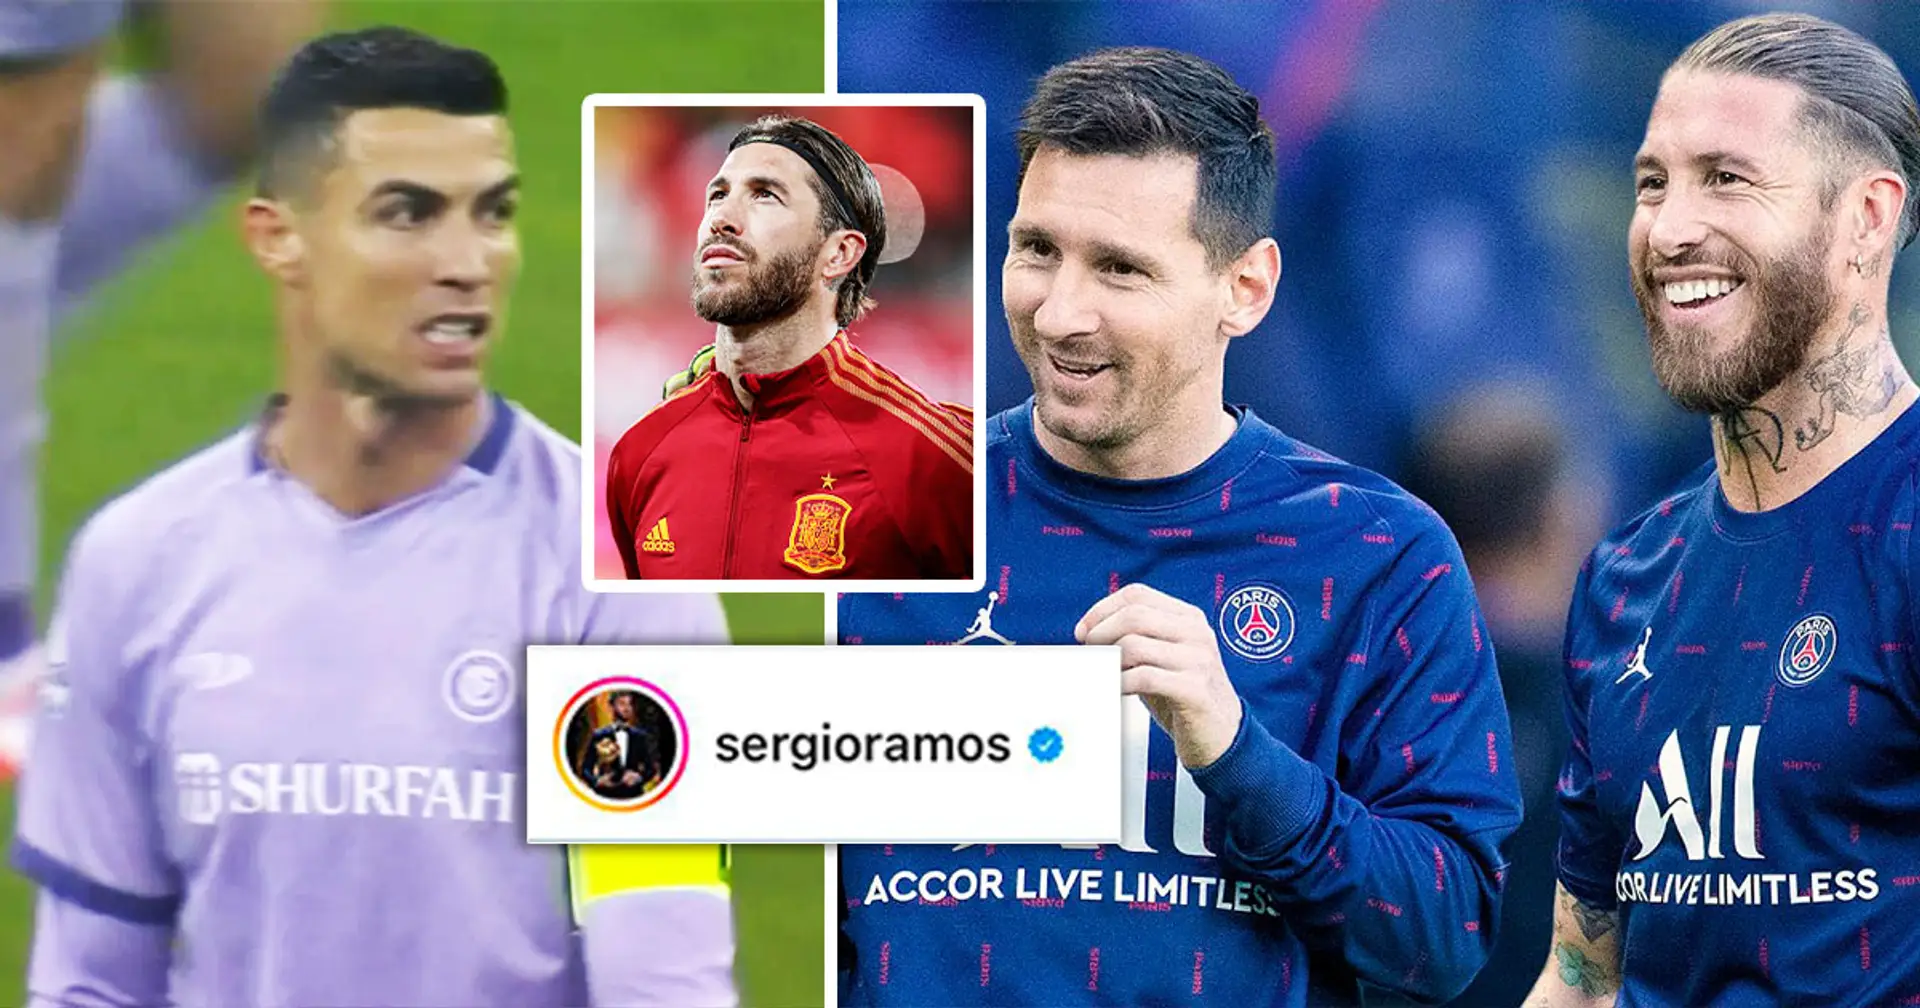 Sergio Ramos mentions Messi and not Cristiano Ronaldo as he bids farewell to Spain national team